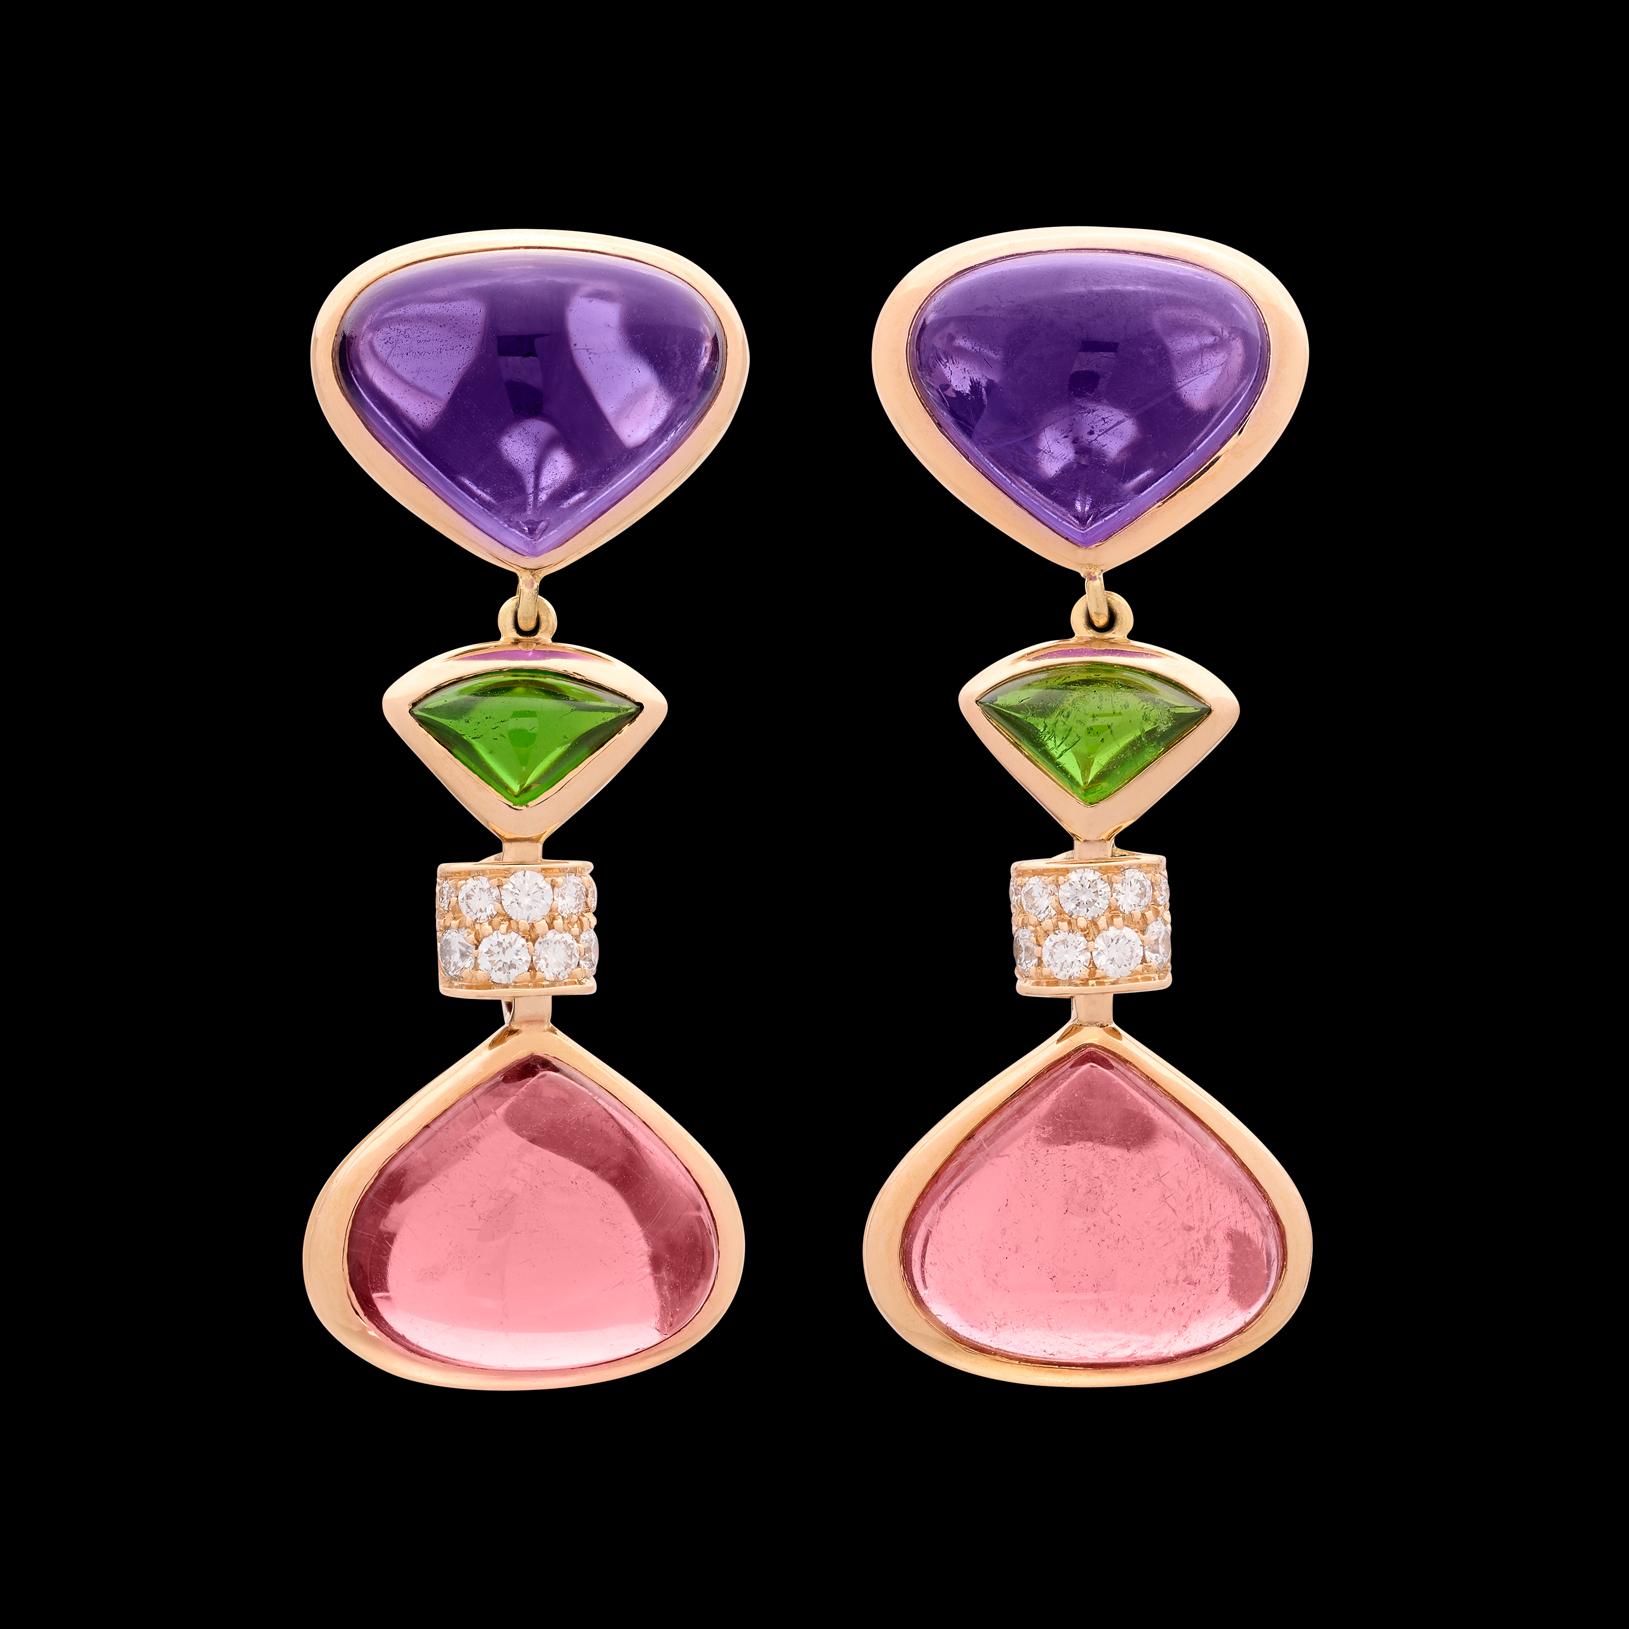 Marina Bulgari has always been known for bold & beautiful design, and this incredible pair of earrings are no exception. Featuring 12.07 carats of pink tourmaline, 9.91 carats of amethyst, and 0.43 carats of fine white diamonds, these Marina B.